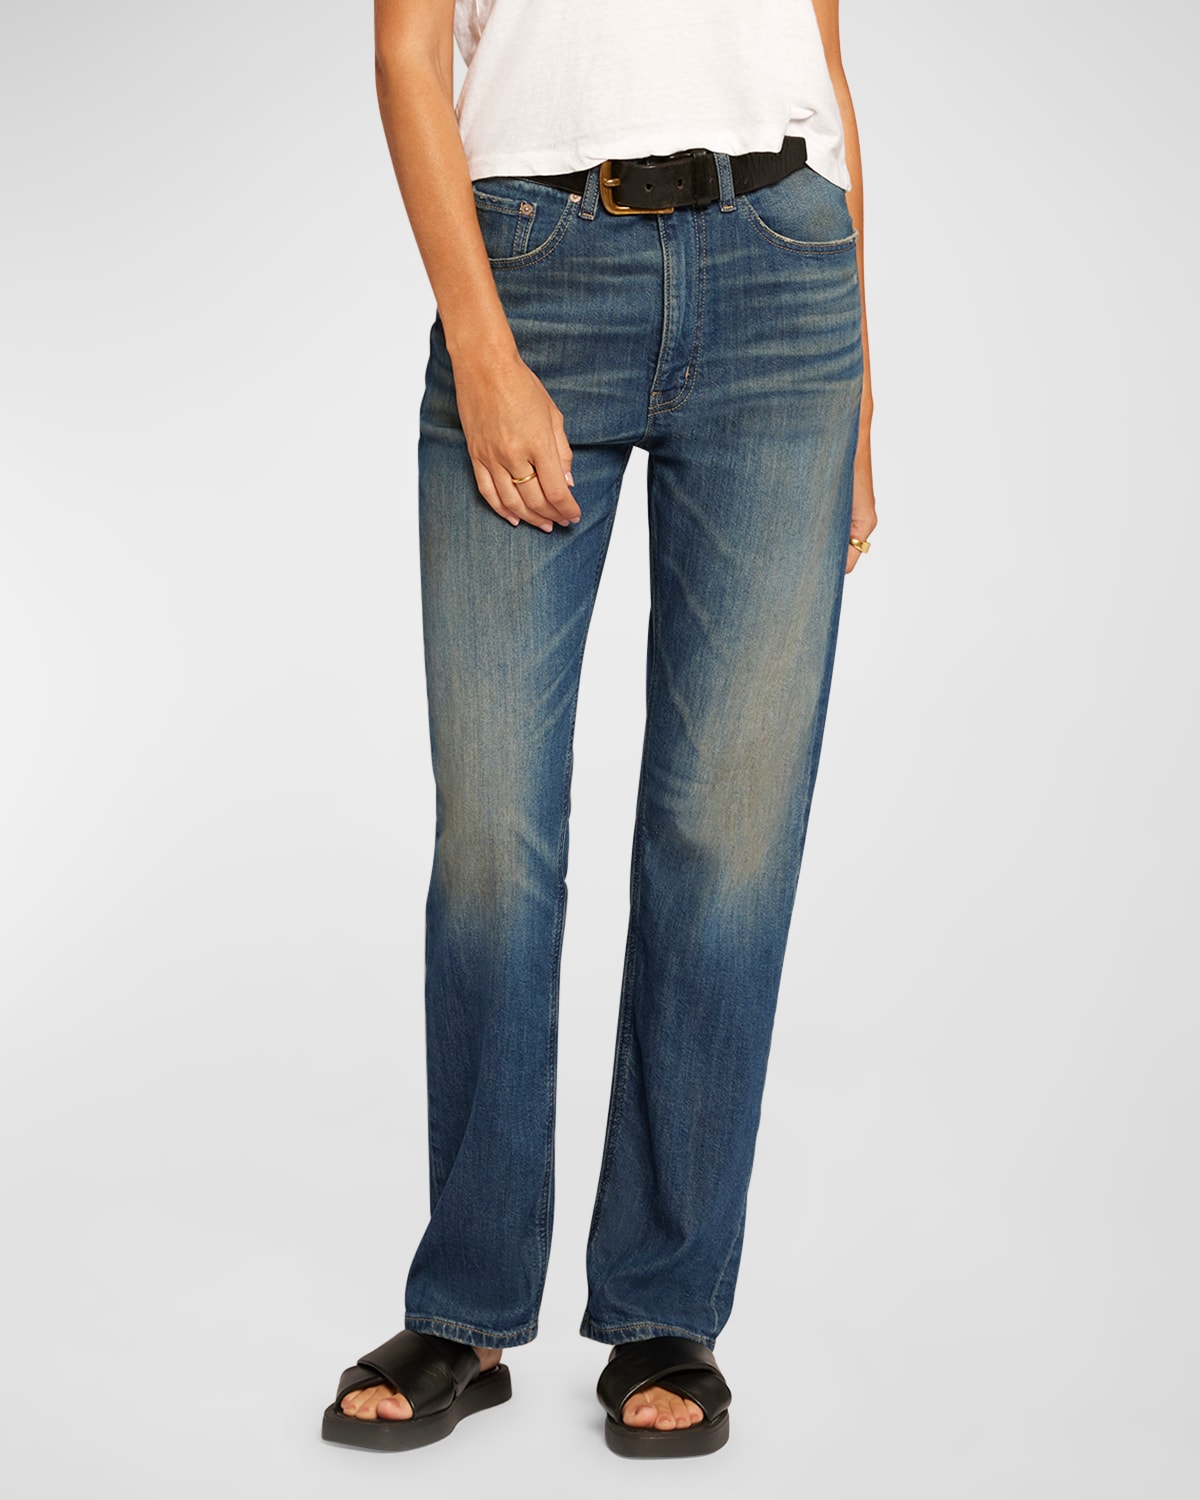 The Cody Straight Jeans